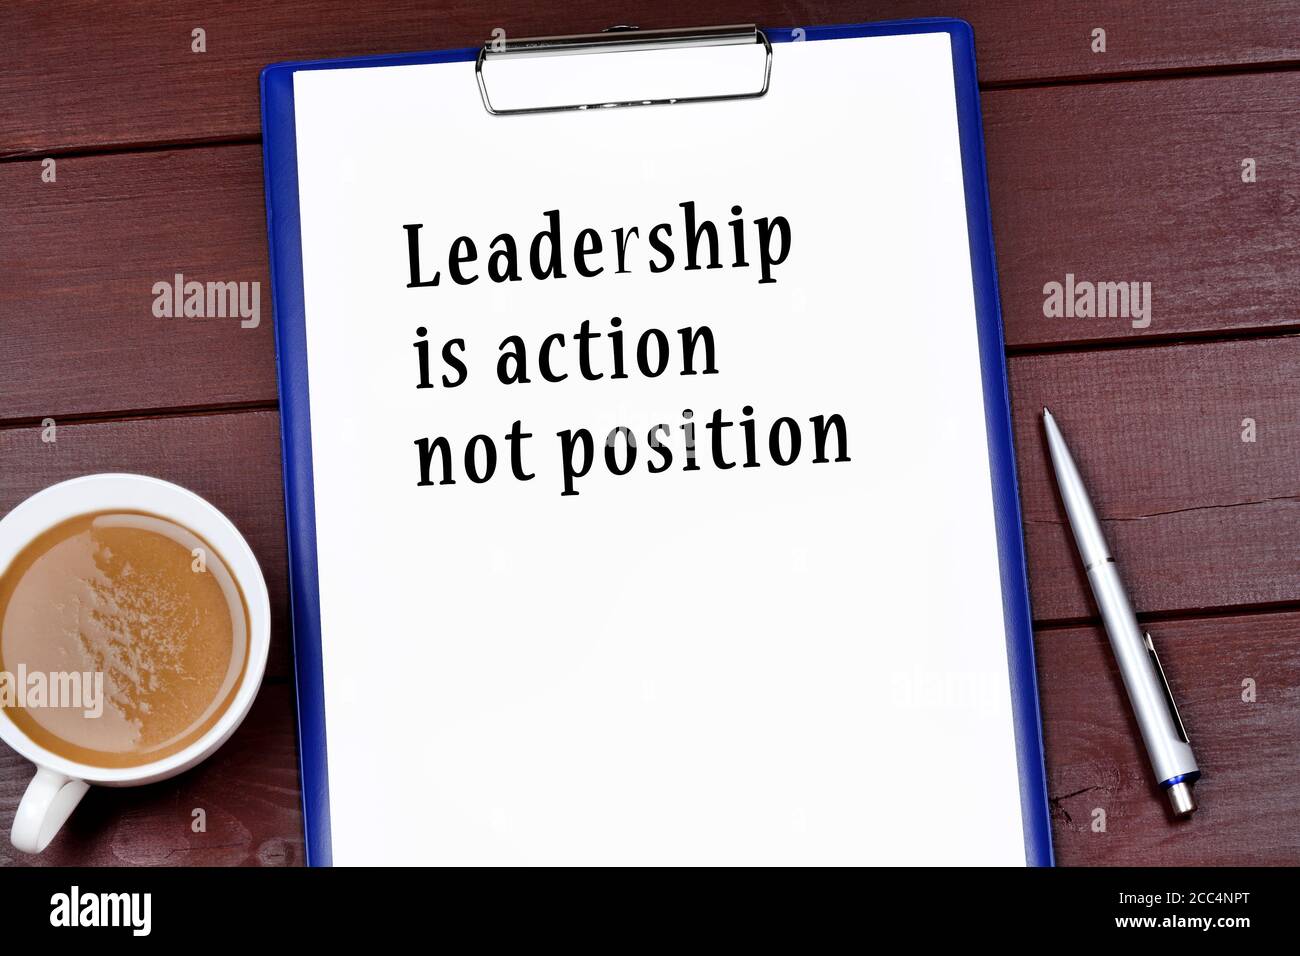 Leadership is action not position written on paper on table Stock Photo